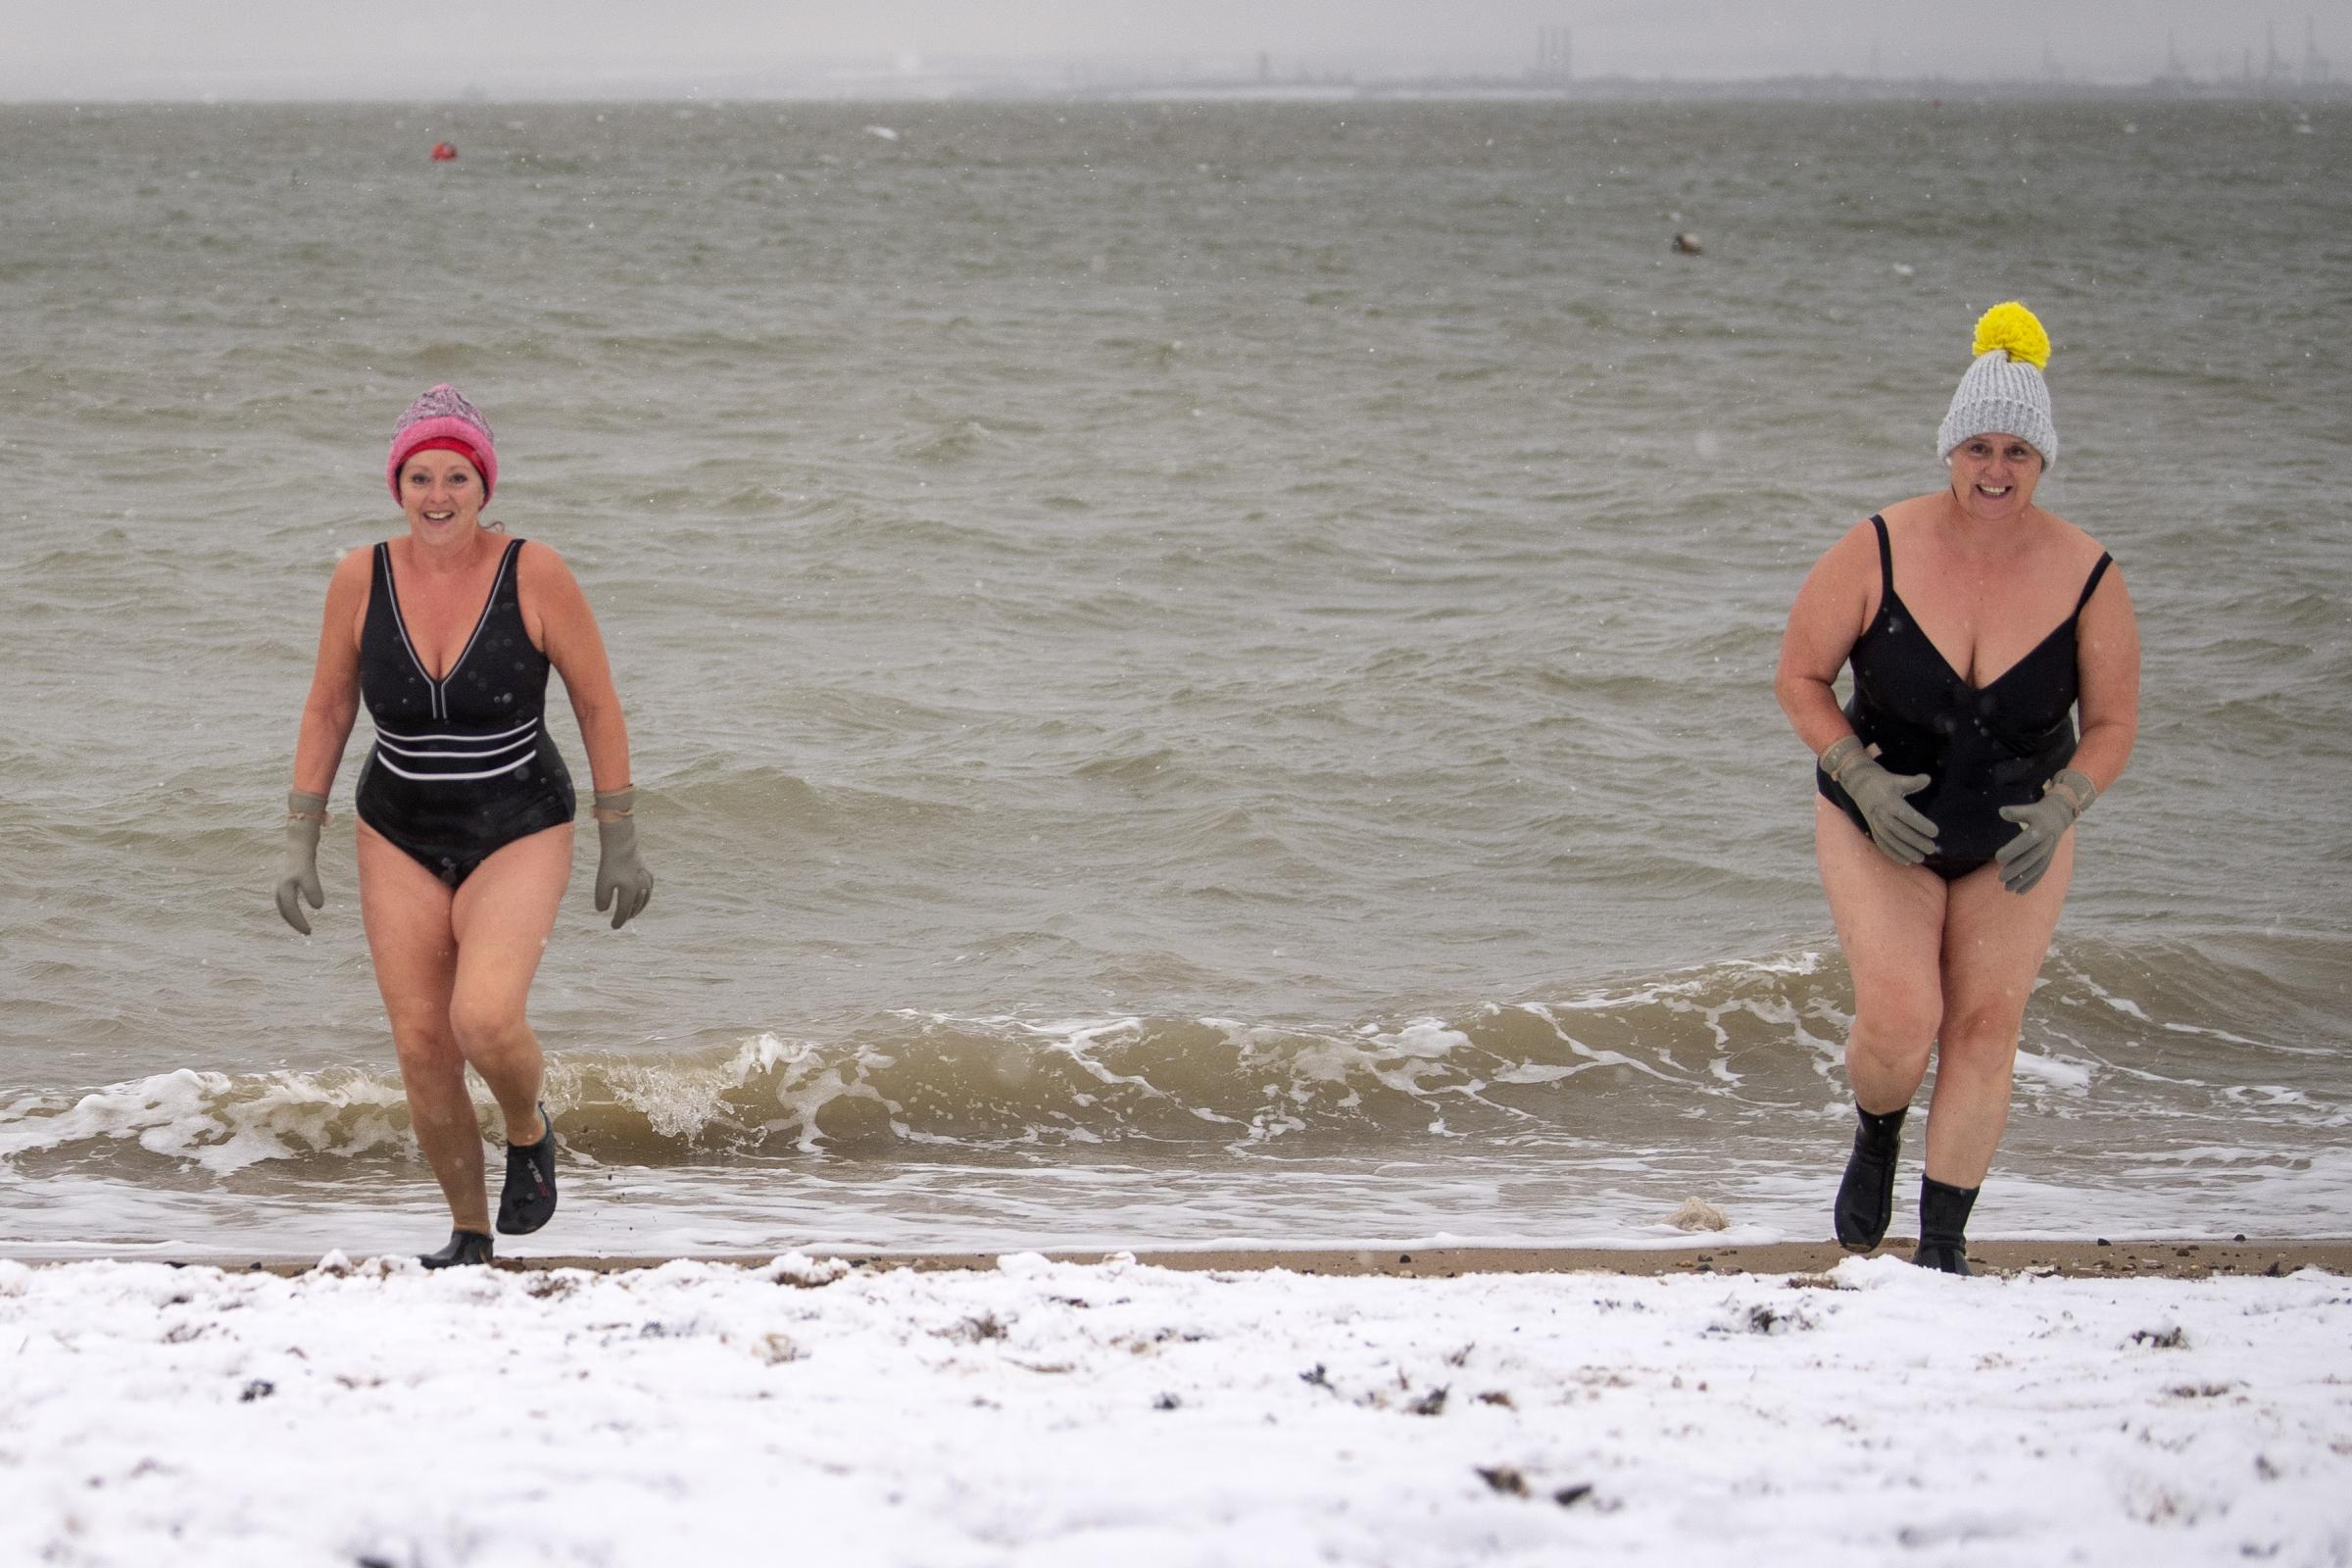 Early morning swimmers Sallyann Manthorp (left) and Peta Hunter walk across snow on the beach after swimming in the 1.4 degree water at Thorpe Bay, Essex, as bitterly cold winds continue to grip much of the nation. Picture date: Tuesday February 9, 2021..